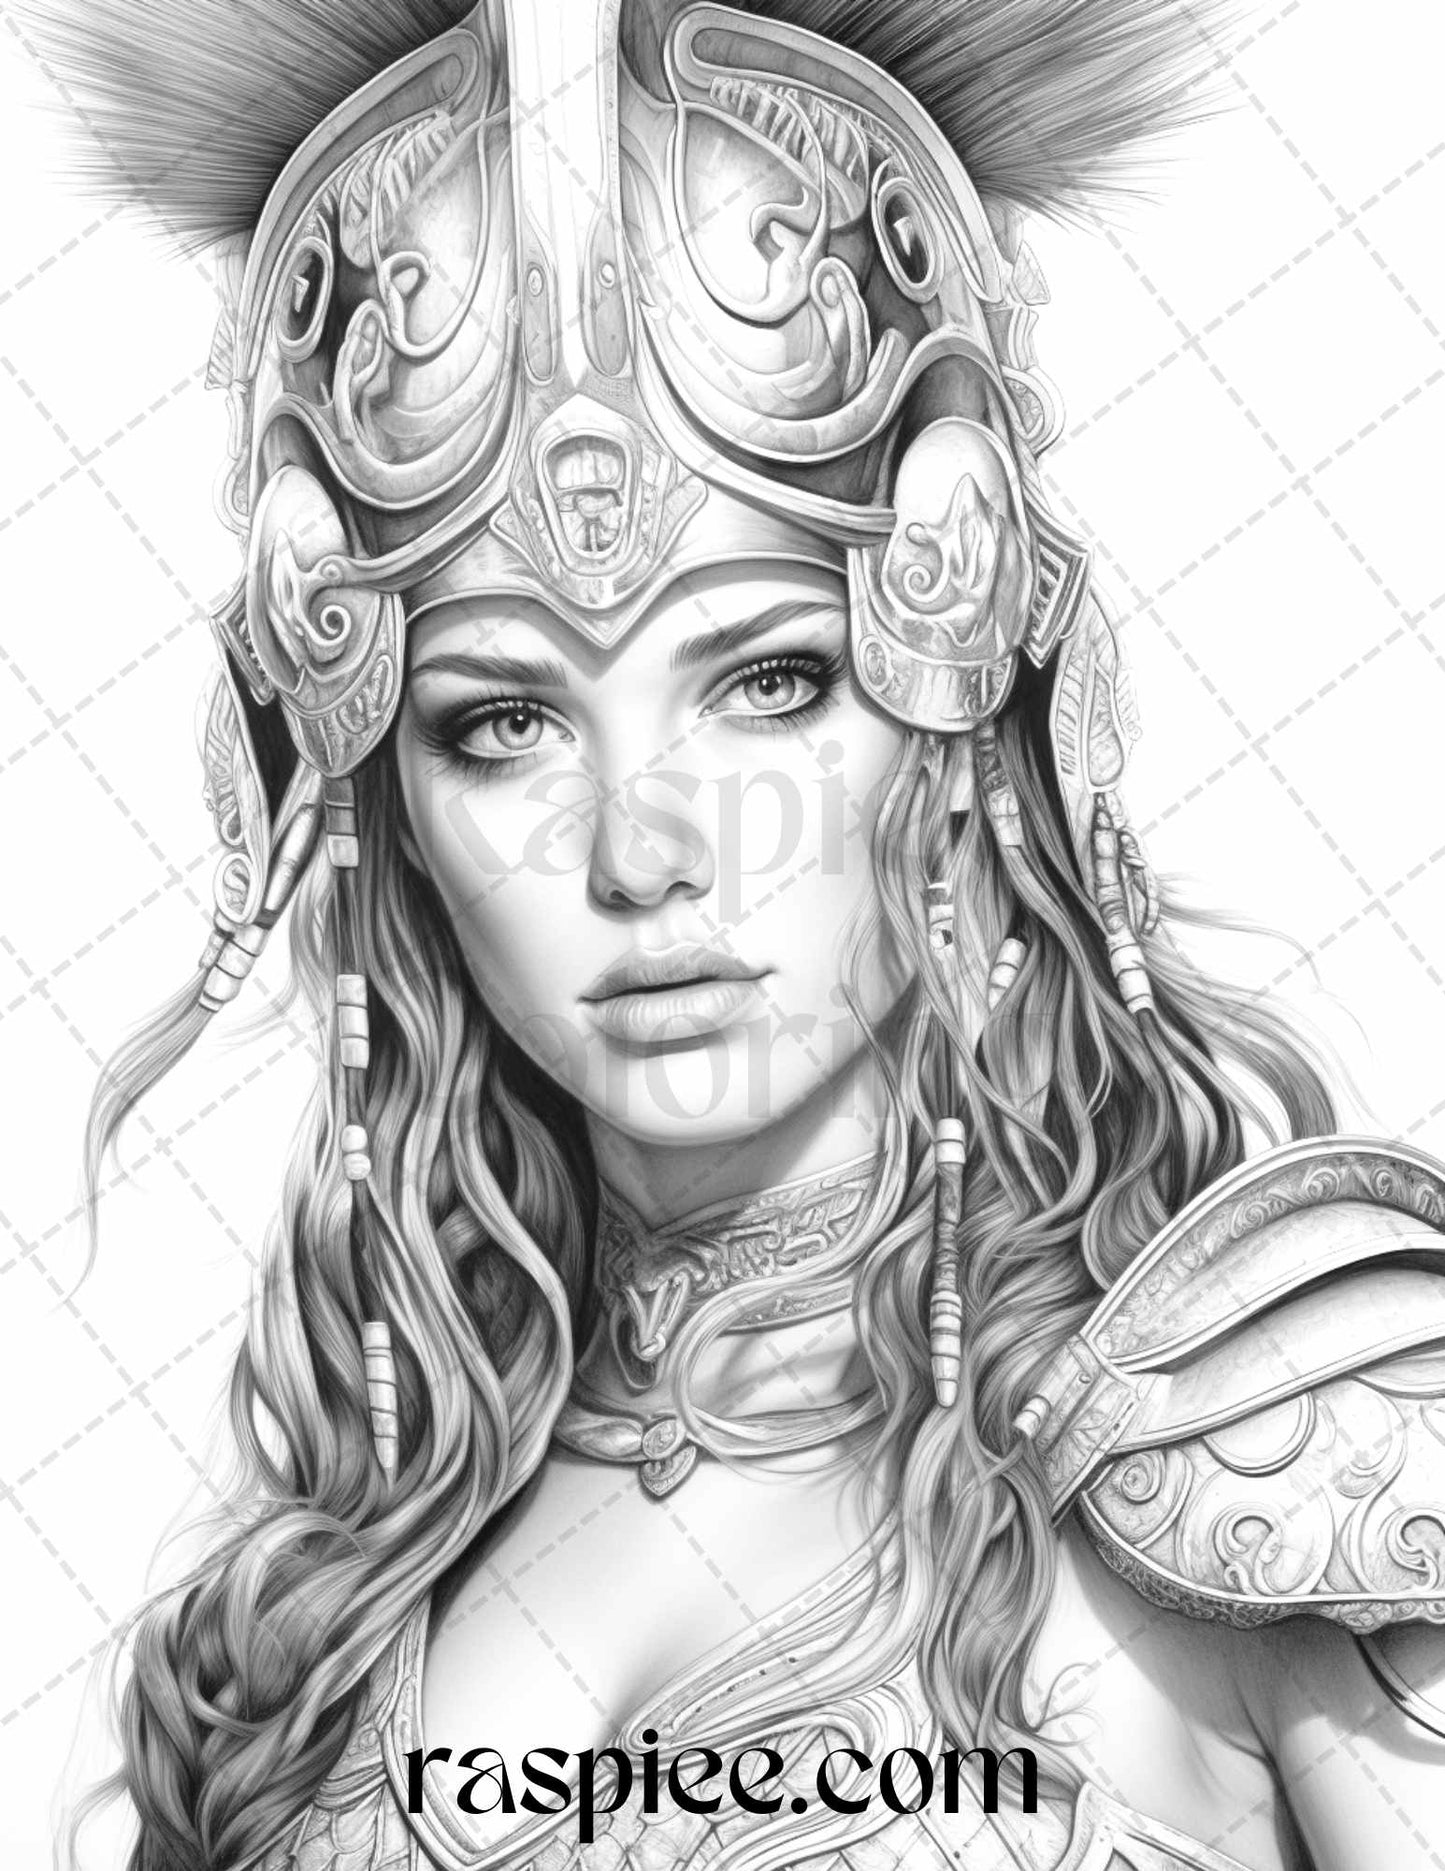 Greek Women Warriors Coloring Pages, Mythology Goddesses Grayscale Coloring, Adult Printable Coloring Sheets, Ancient Greece Female Warriors Illustrations, Portrait Coloring Pages for Adults